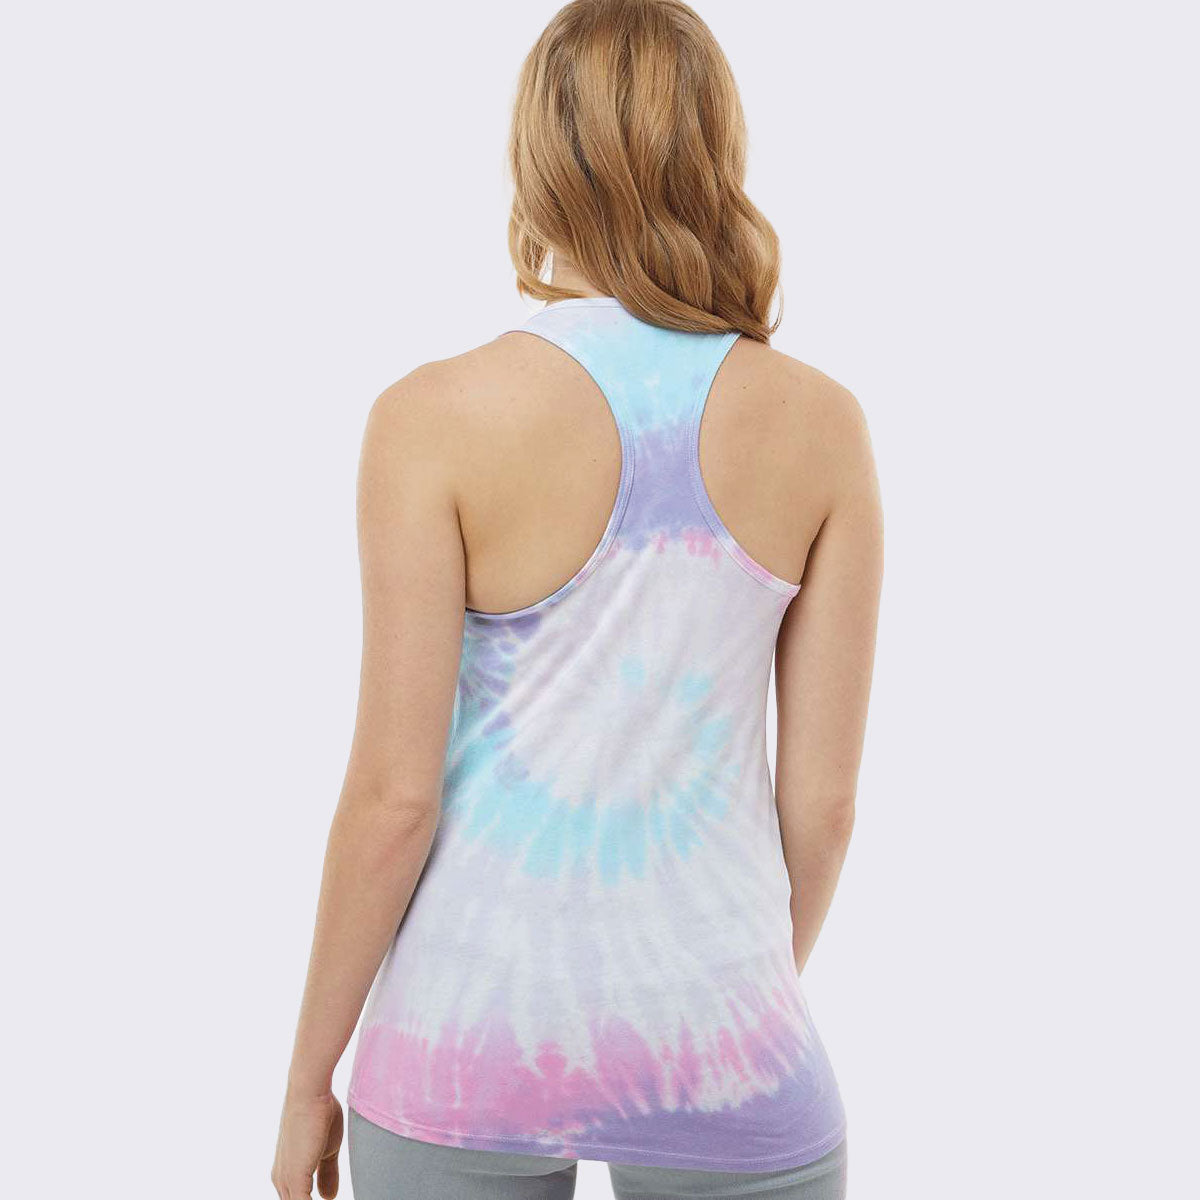 Therapy Tie-Dyed Racerback Tank Top